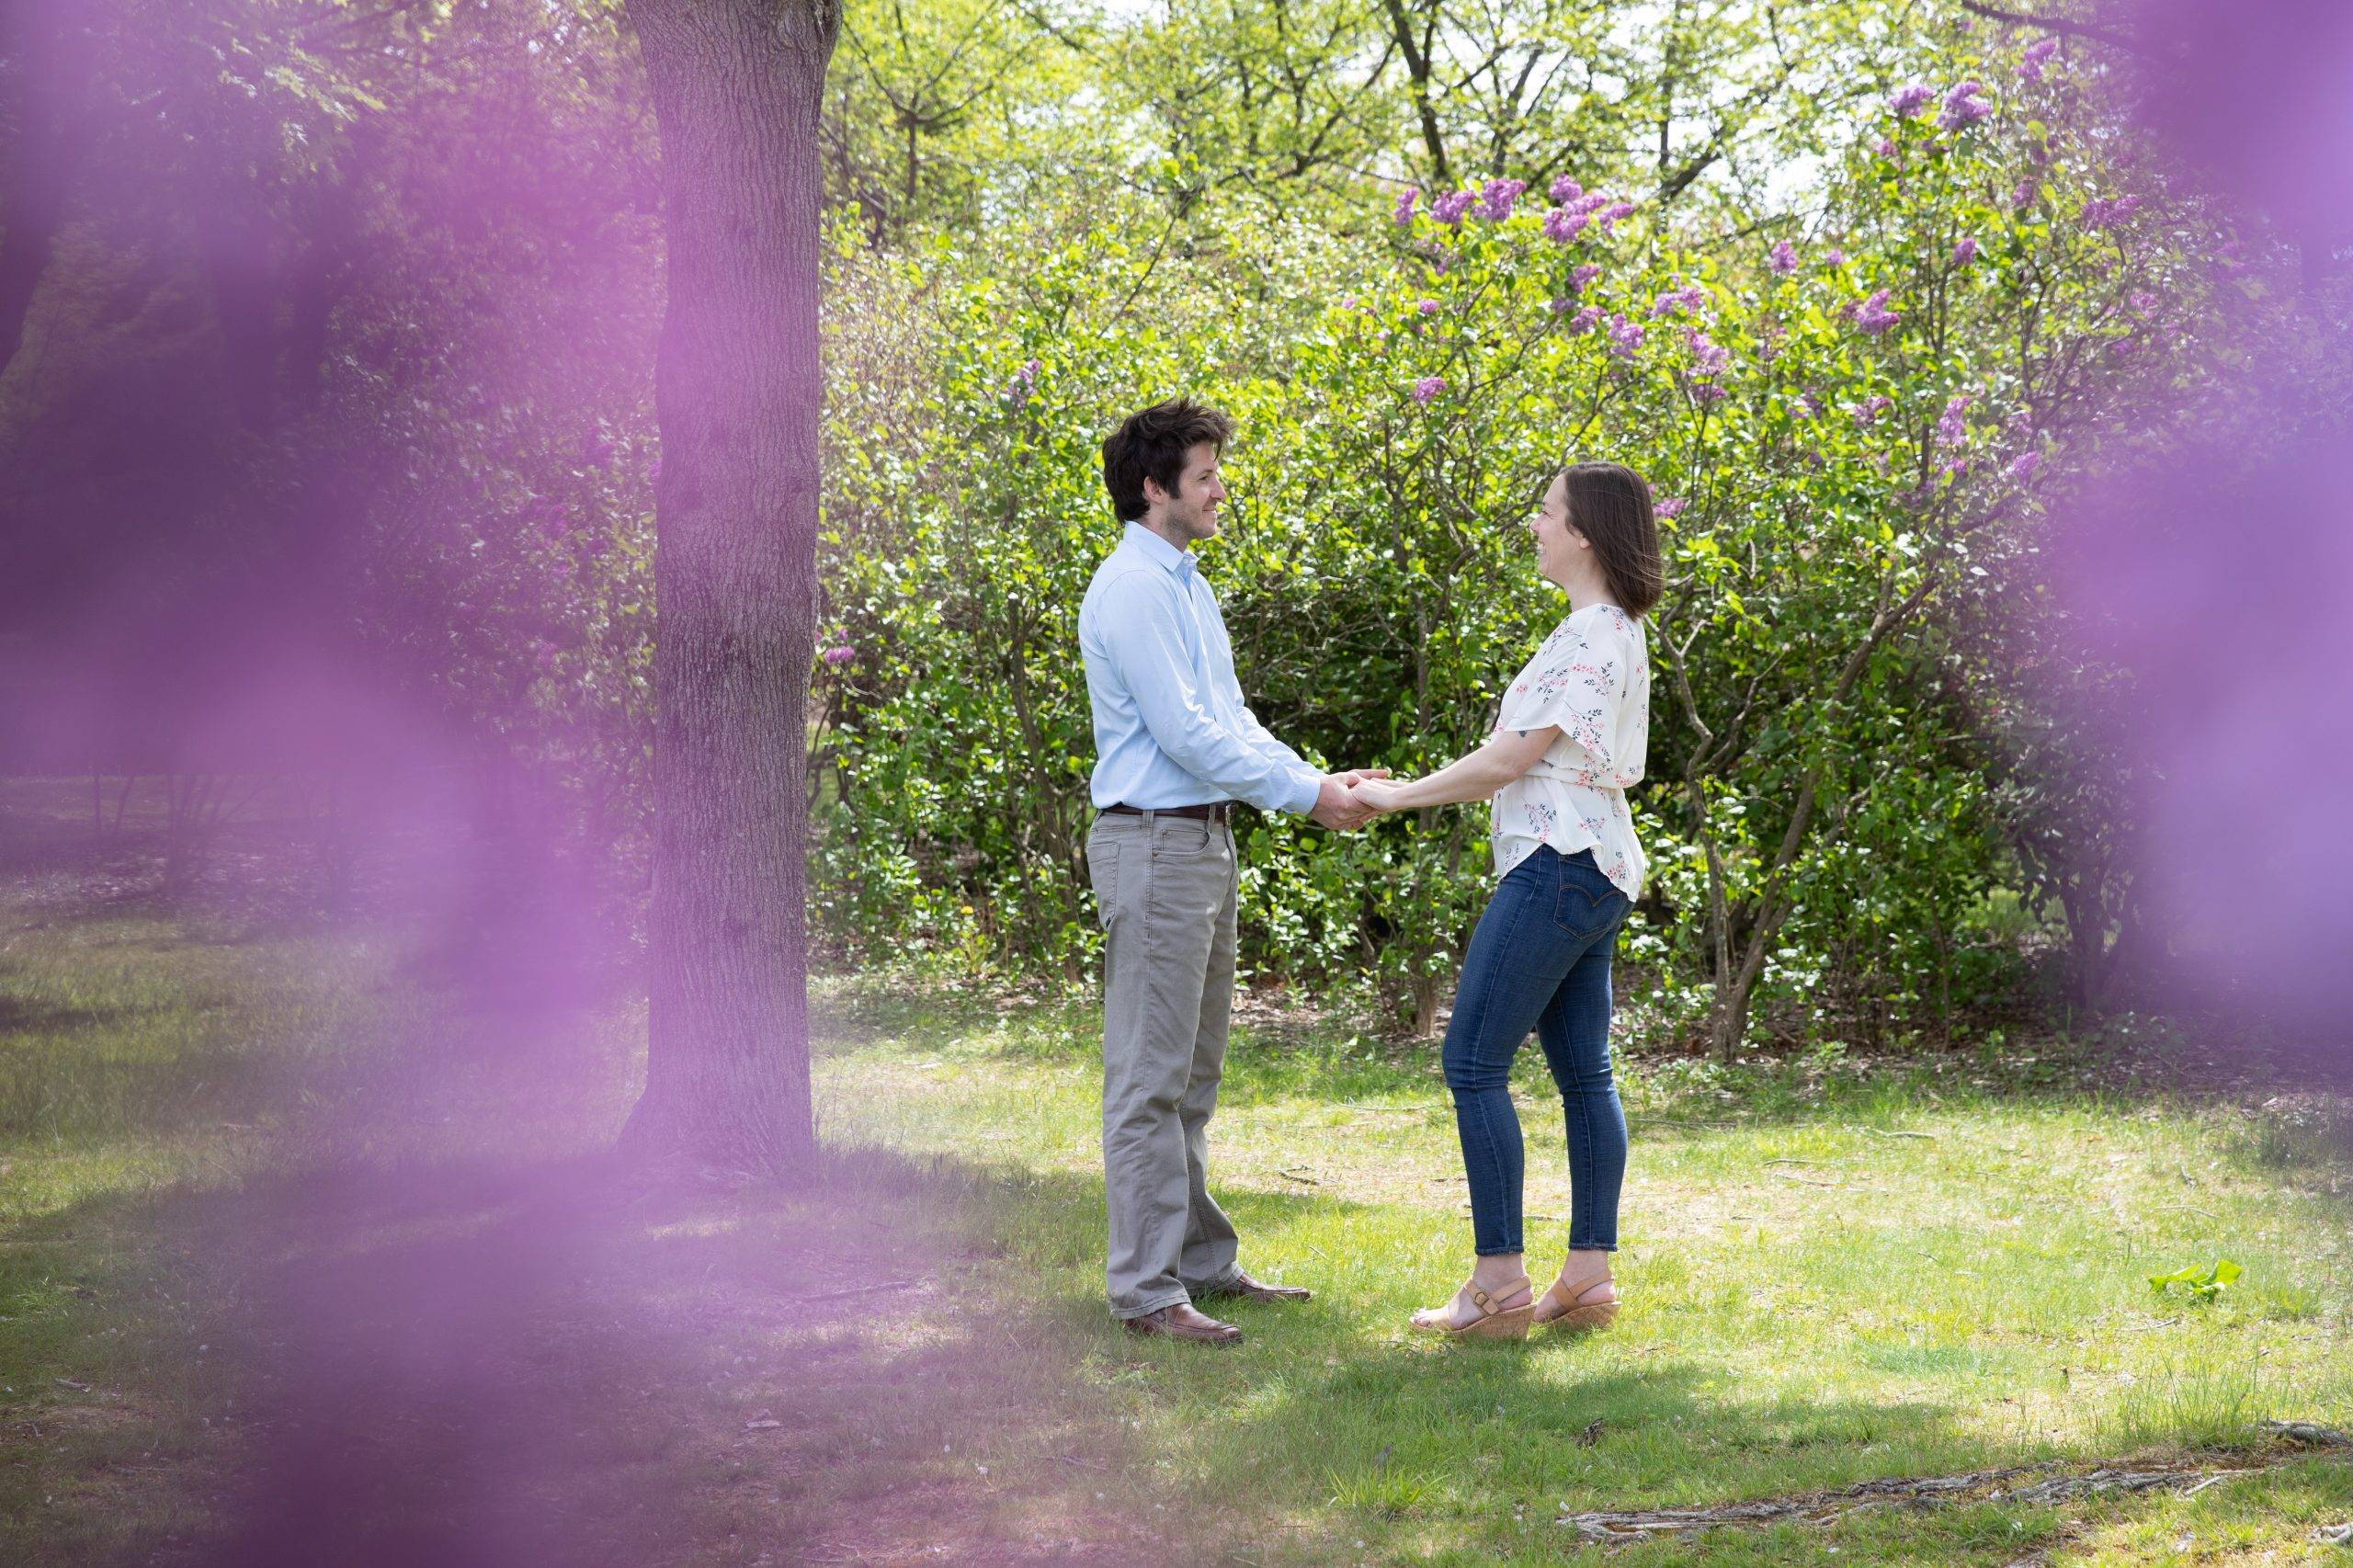 A couple holding hands in a field with purple flowers.